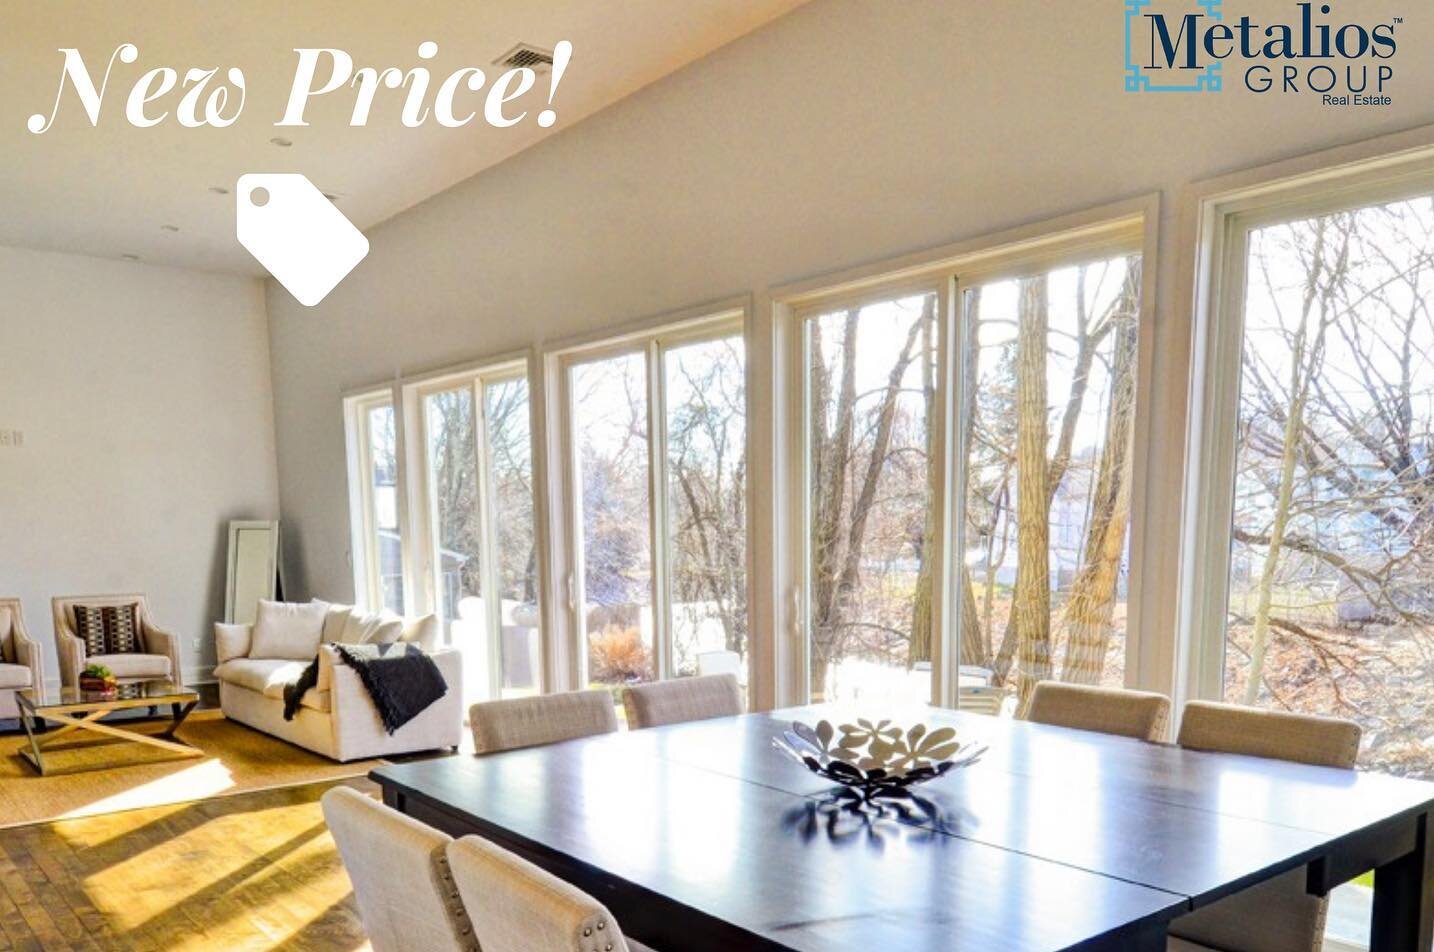 NEW $ PRICE! ✨ Don't miss 150 Pemperwick Rd, in Greenwich, CT!

This chic home has an open loft style, with 12' ceilings and a stunning wall of windows overlooking views &amp; sounds of the Byram River. You'll enjoy tons of natural sunlight!

Enter t